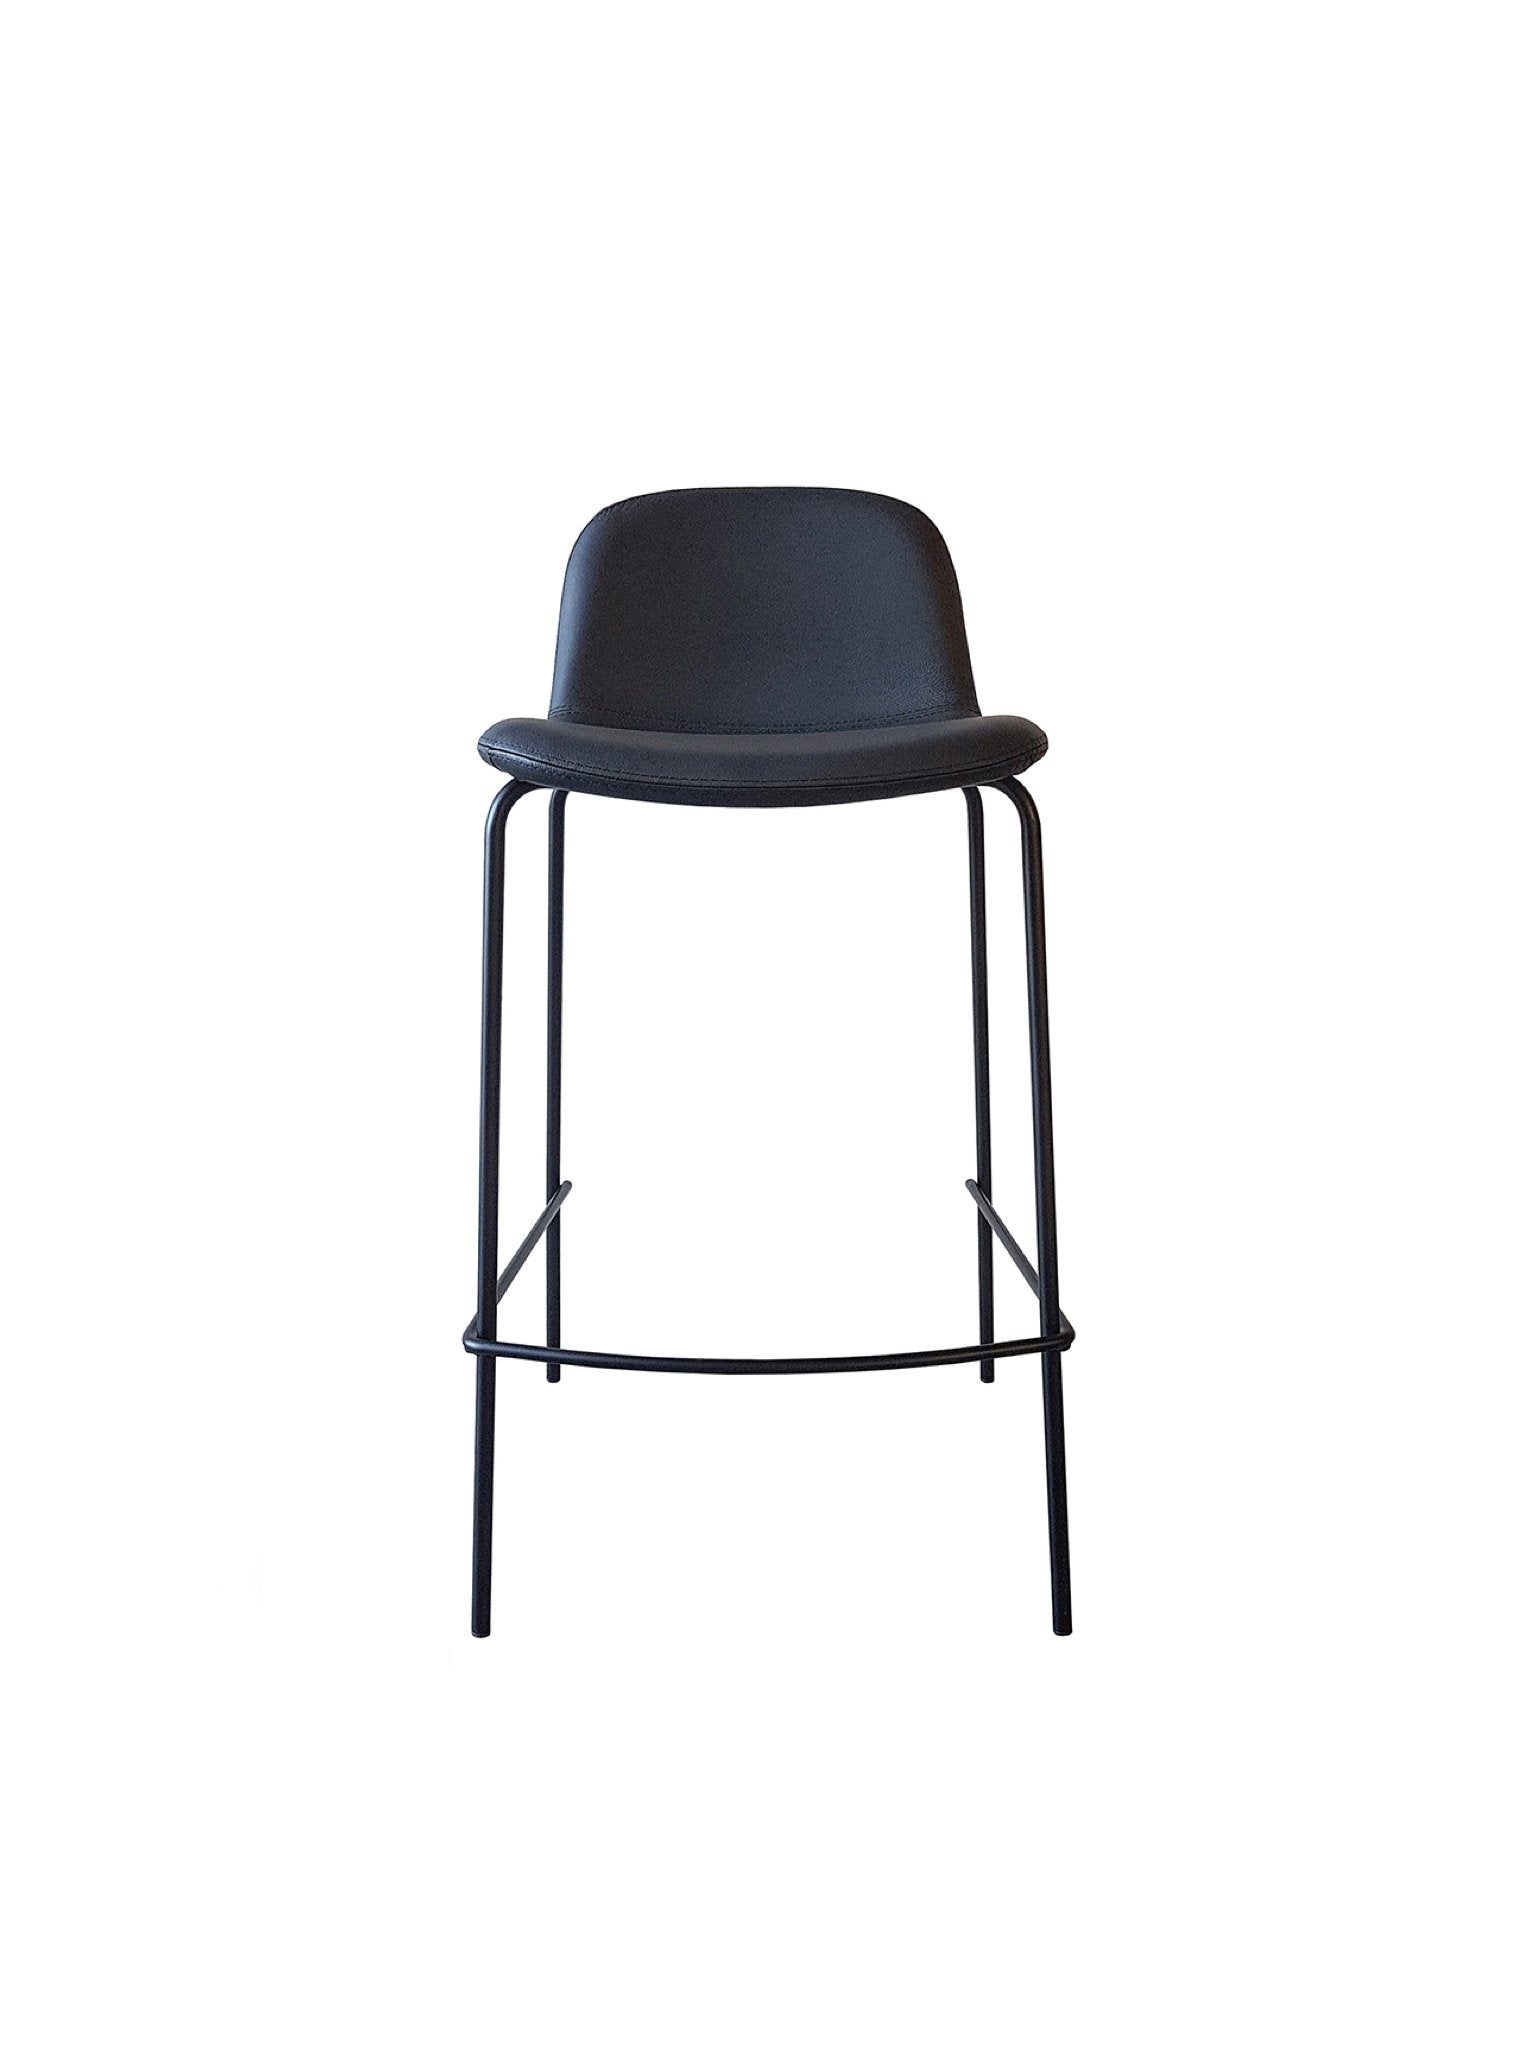 Bacco Slim High Stool-Job's-Contract Furniture Store